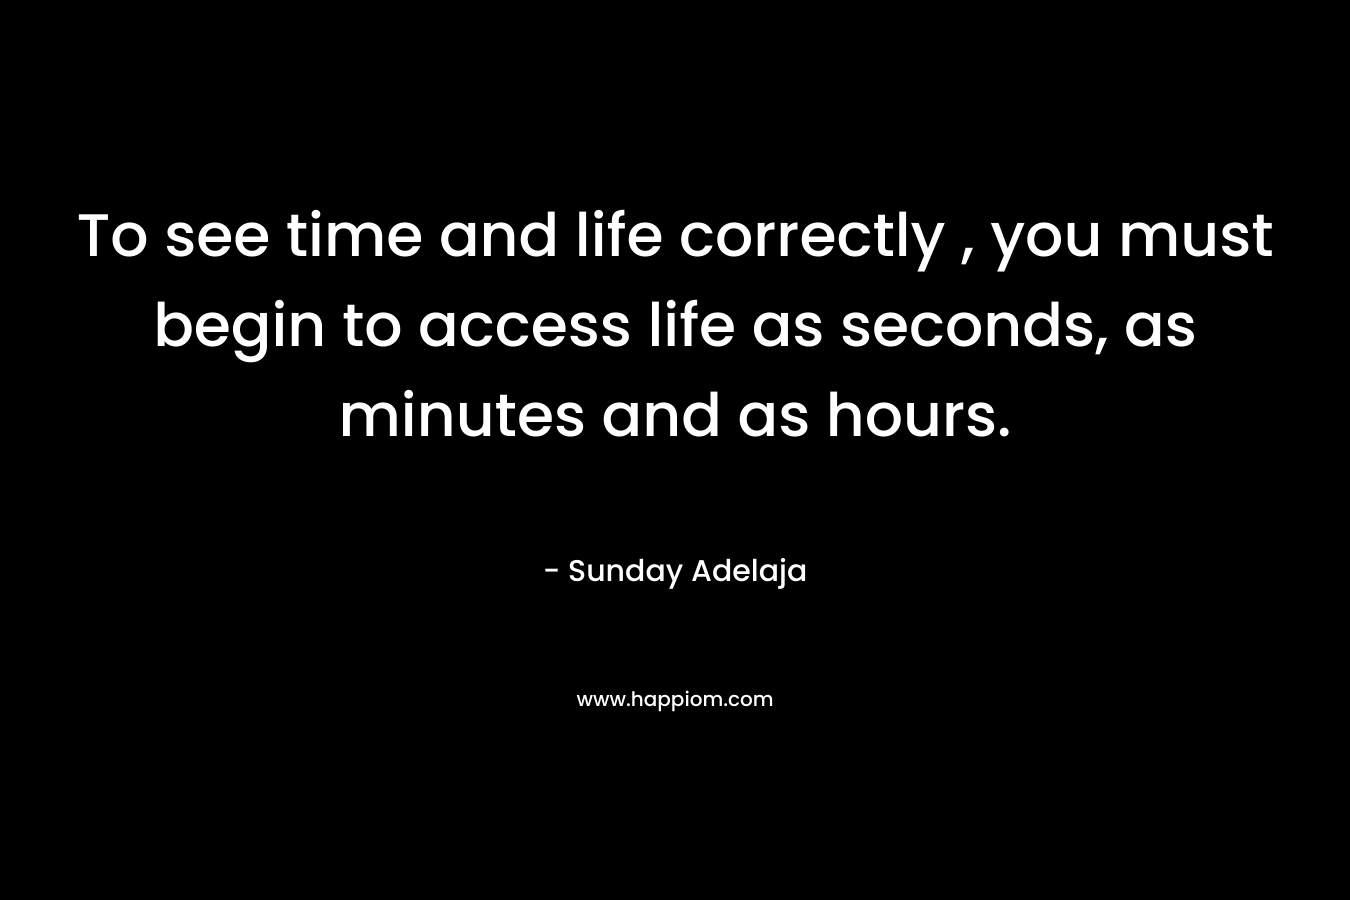 To see time and life correctly , you must begin to access life as seconds, as minutes and as hours.